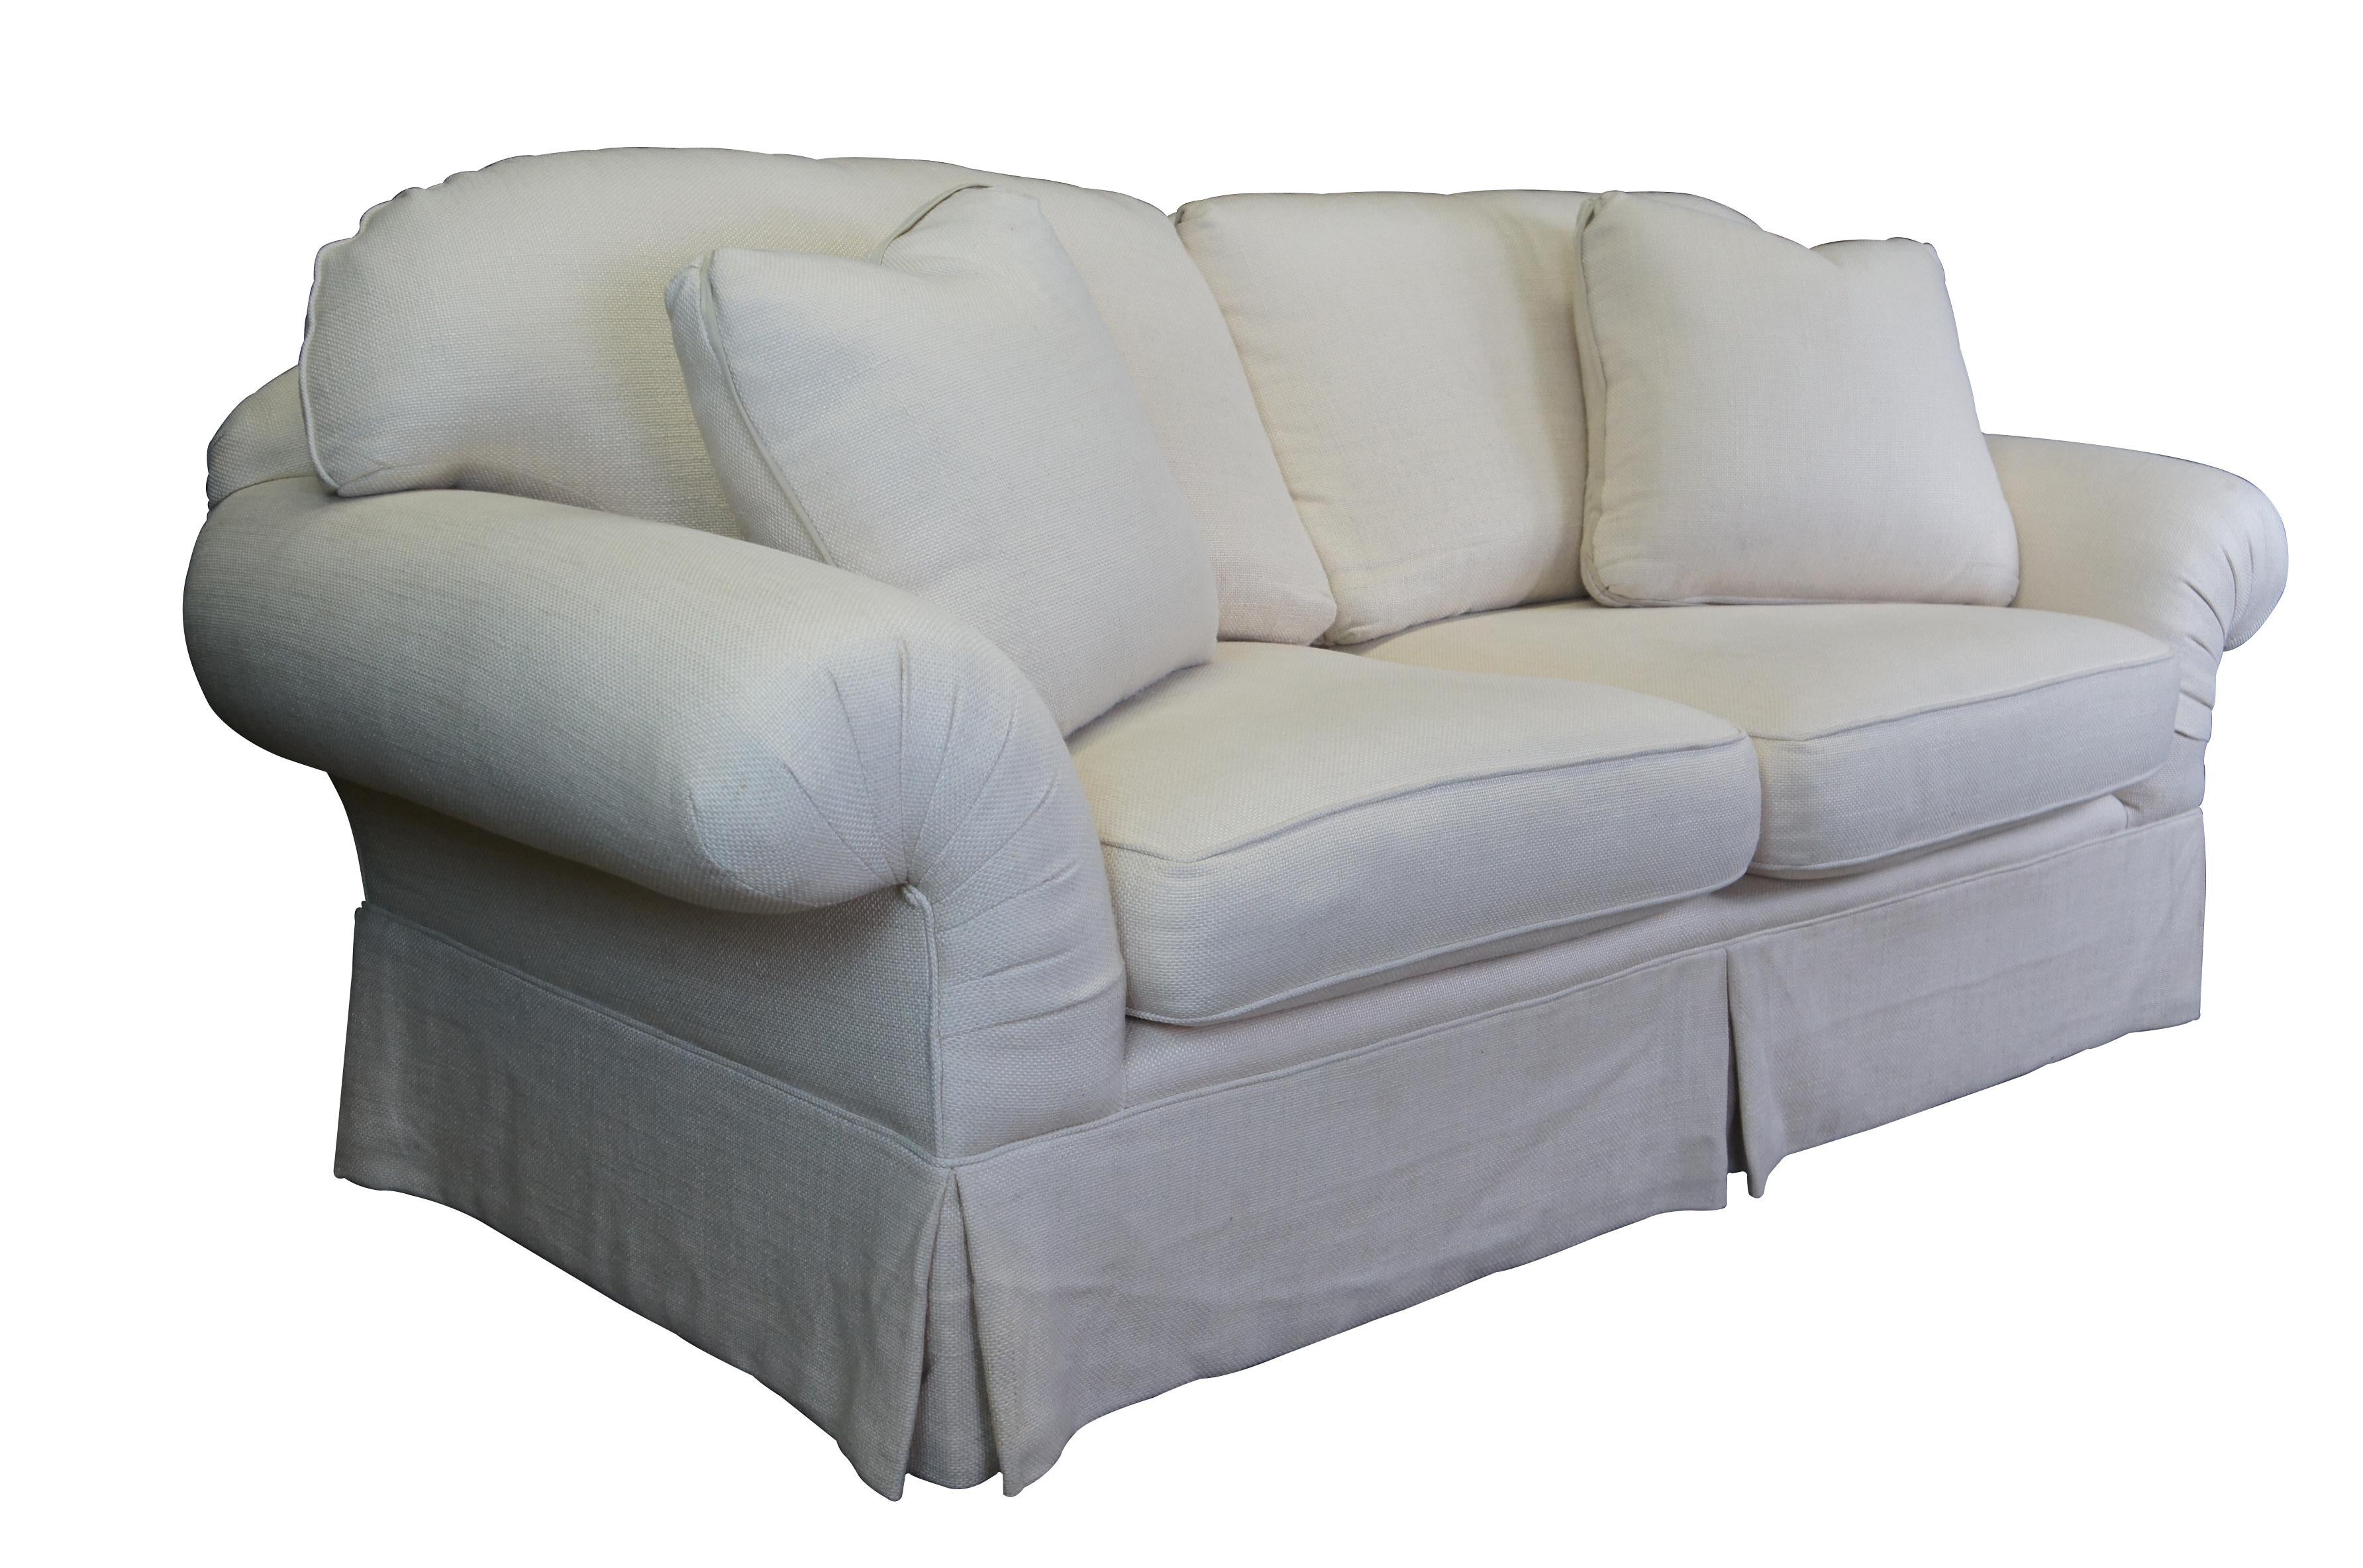 Vintage pair of two contemporary / modern lounge sofas featuring plush overstuffed rolled arm design with off white cotton fabric, skirted base and lumbar pillows.  Attributed to Taylor King.

Dimensions:
42